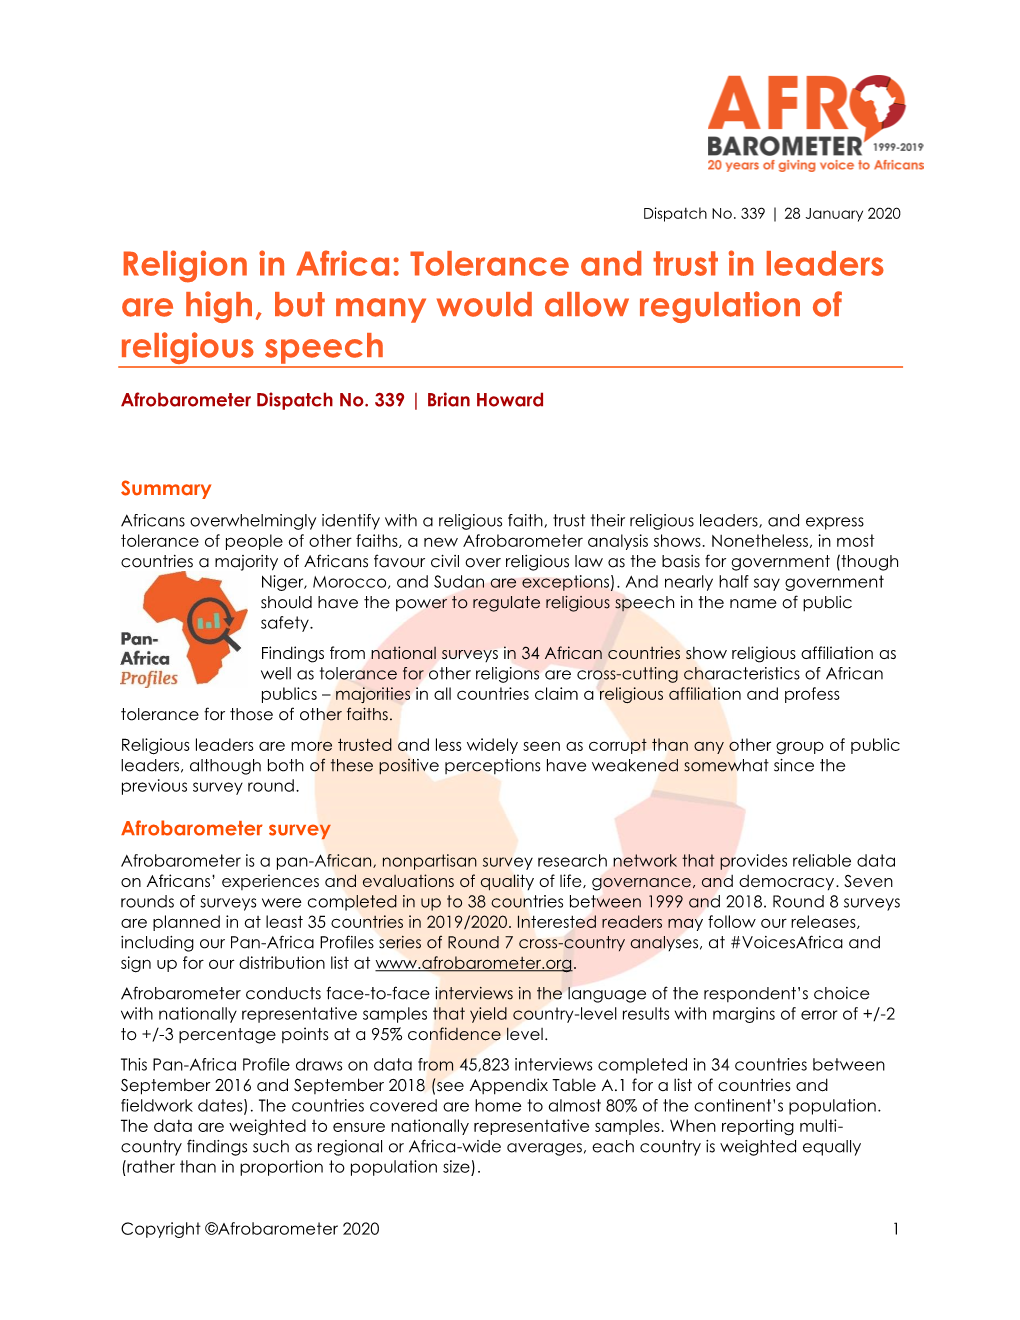 Religion in Africa: Tolerance and Trust in Leaders Are High, but Many Would Allow Regulation of Religious Speech